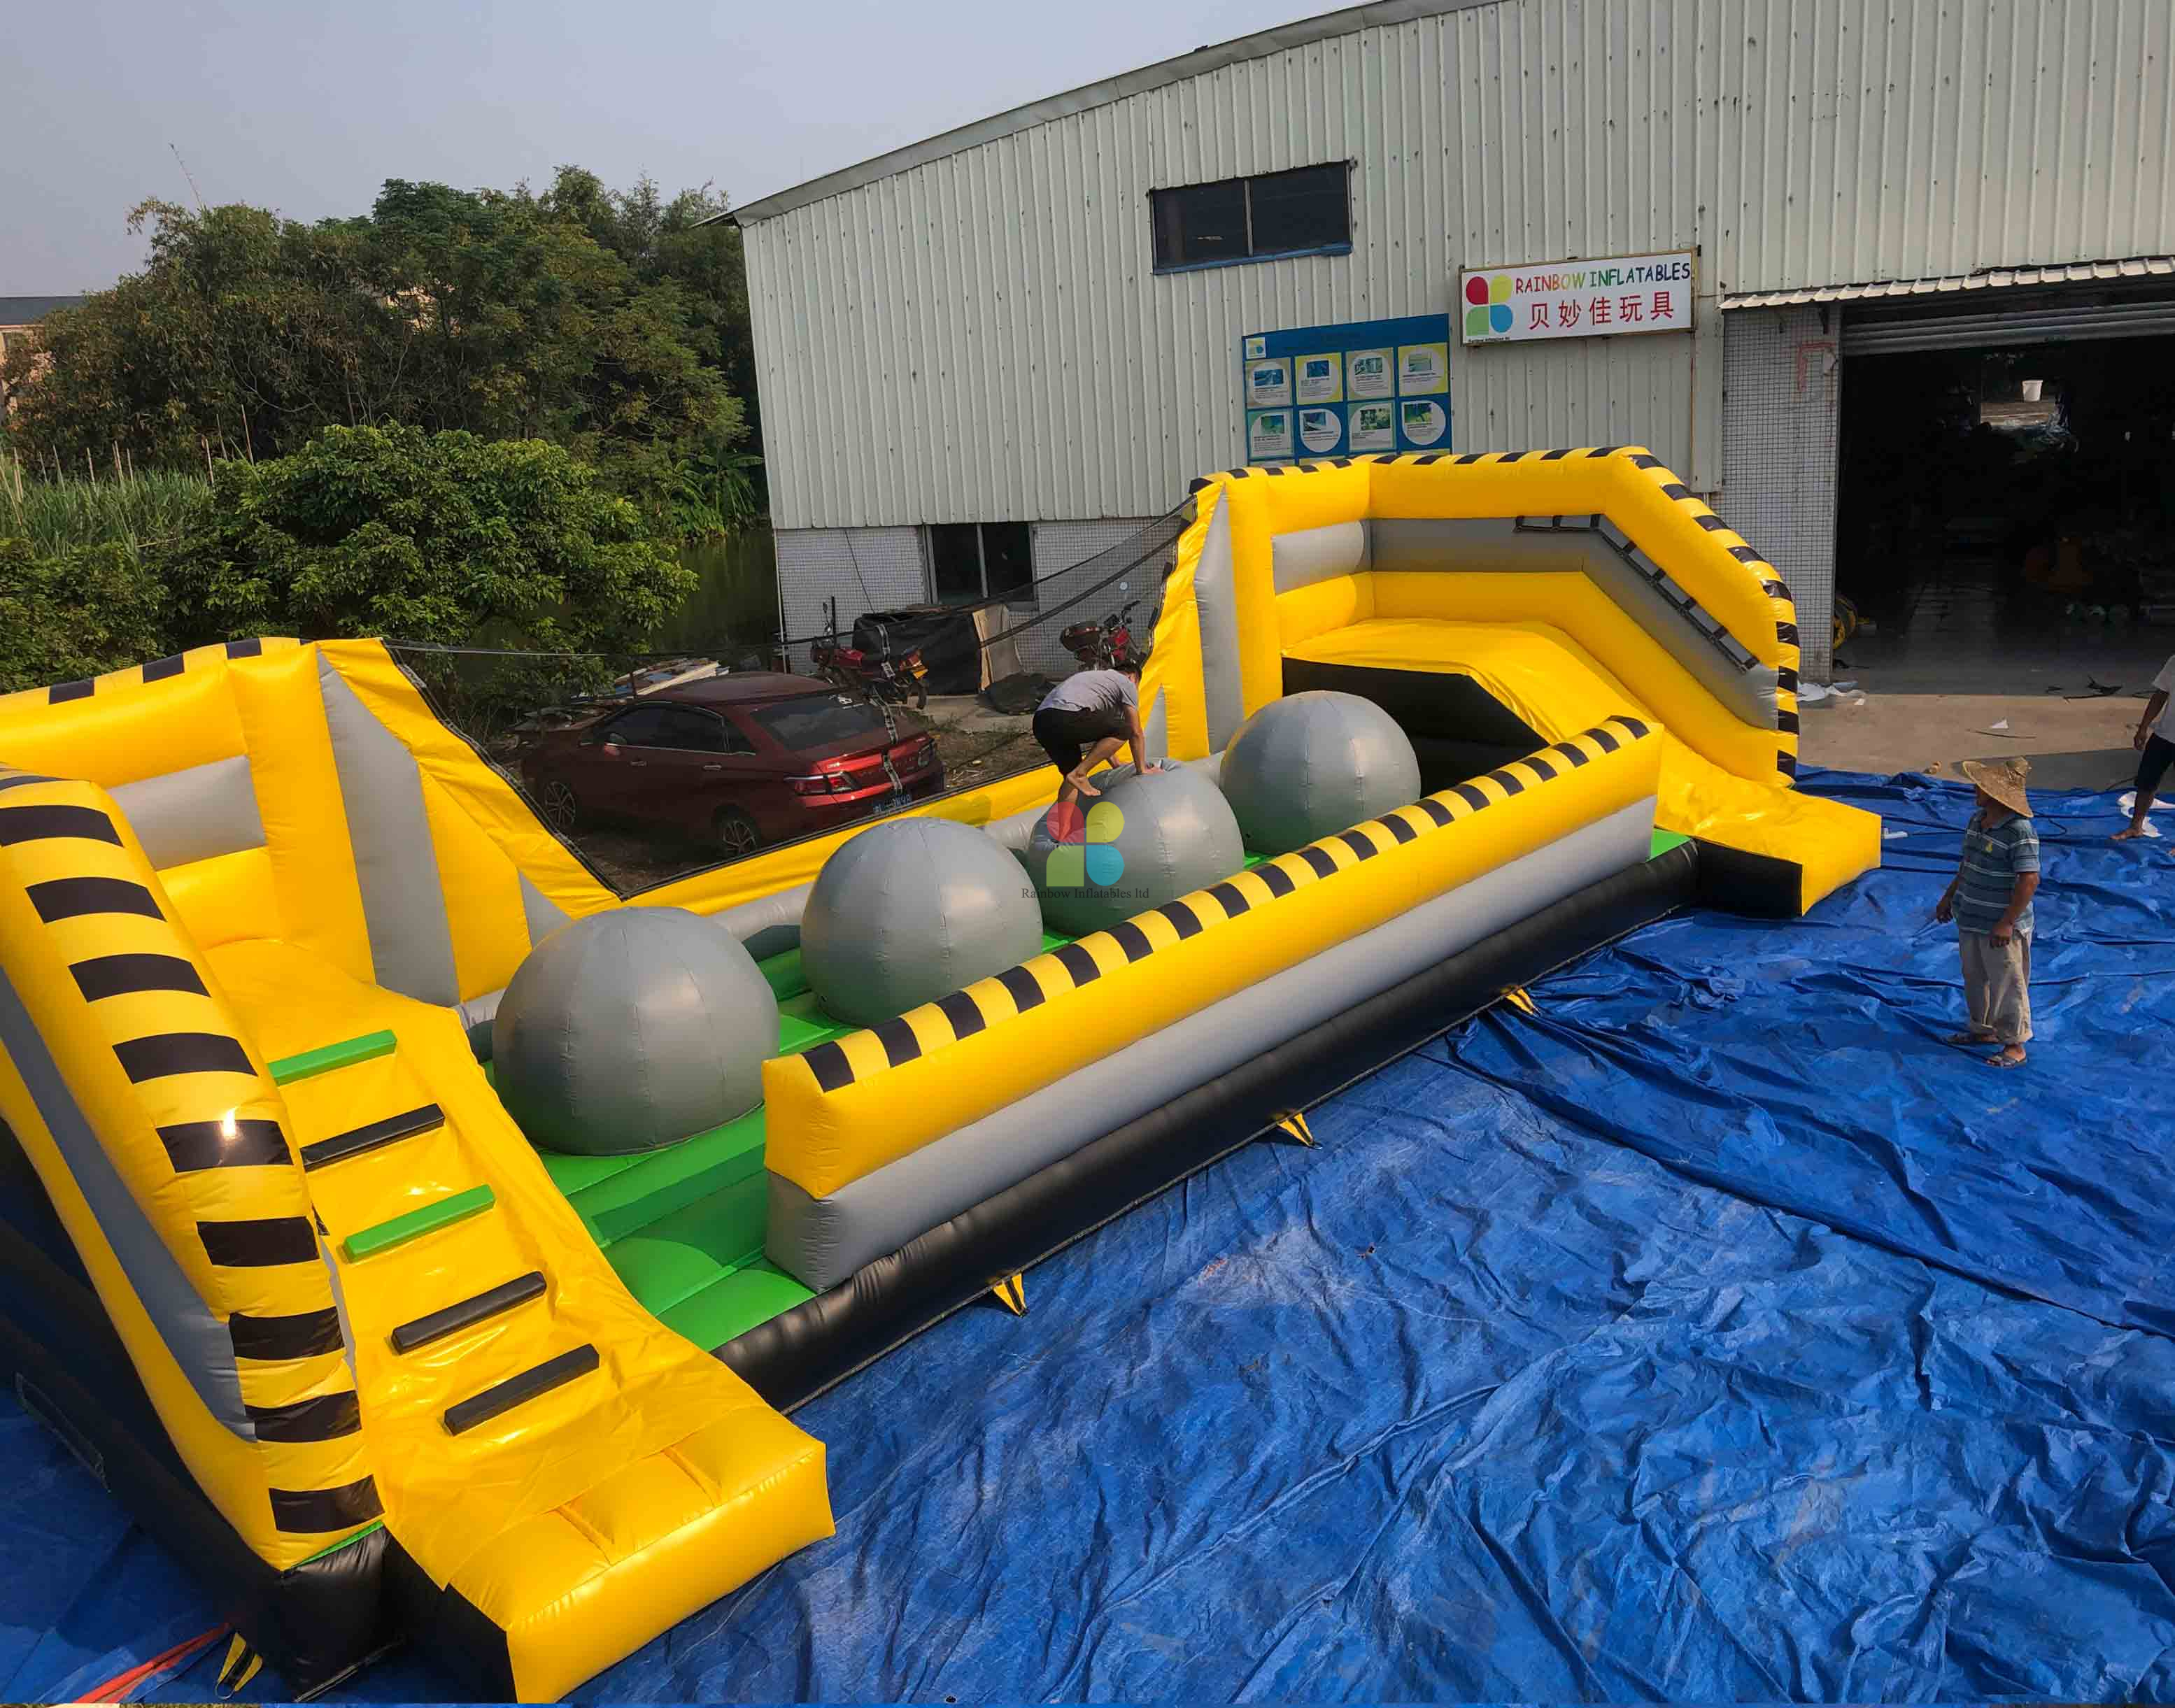 INFLATABLE YELLOW AND GREEN BIG BALLER GAME